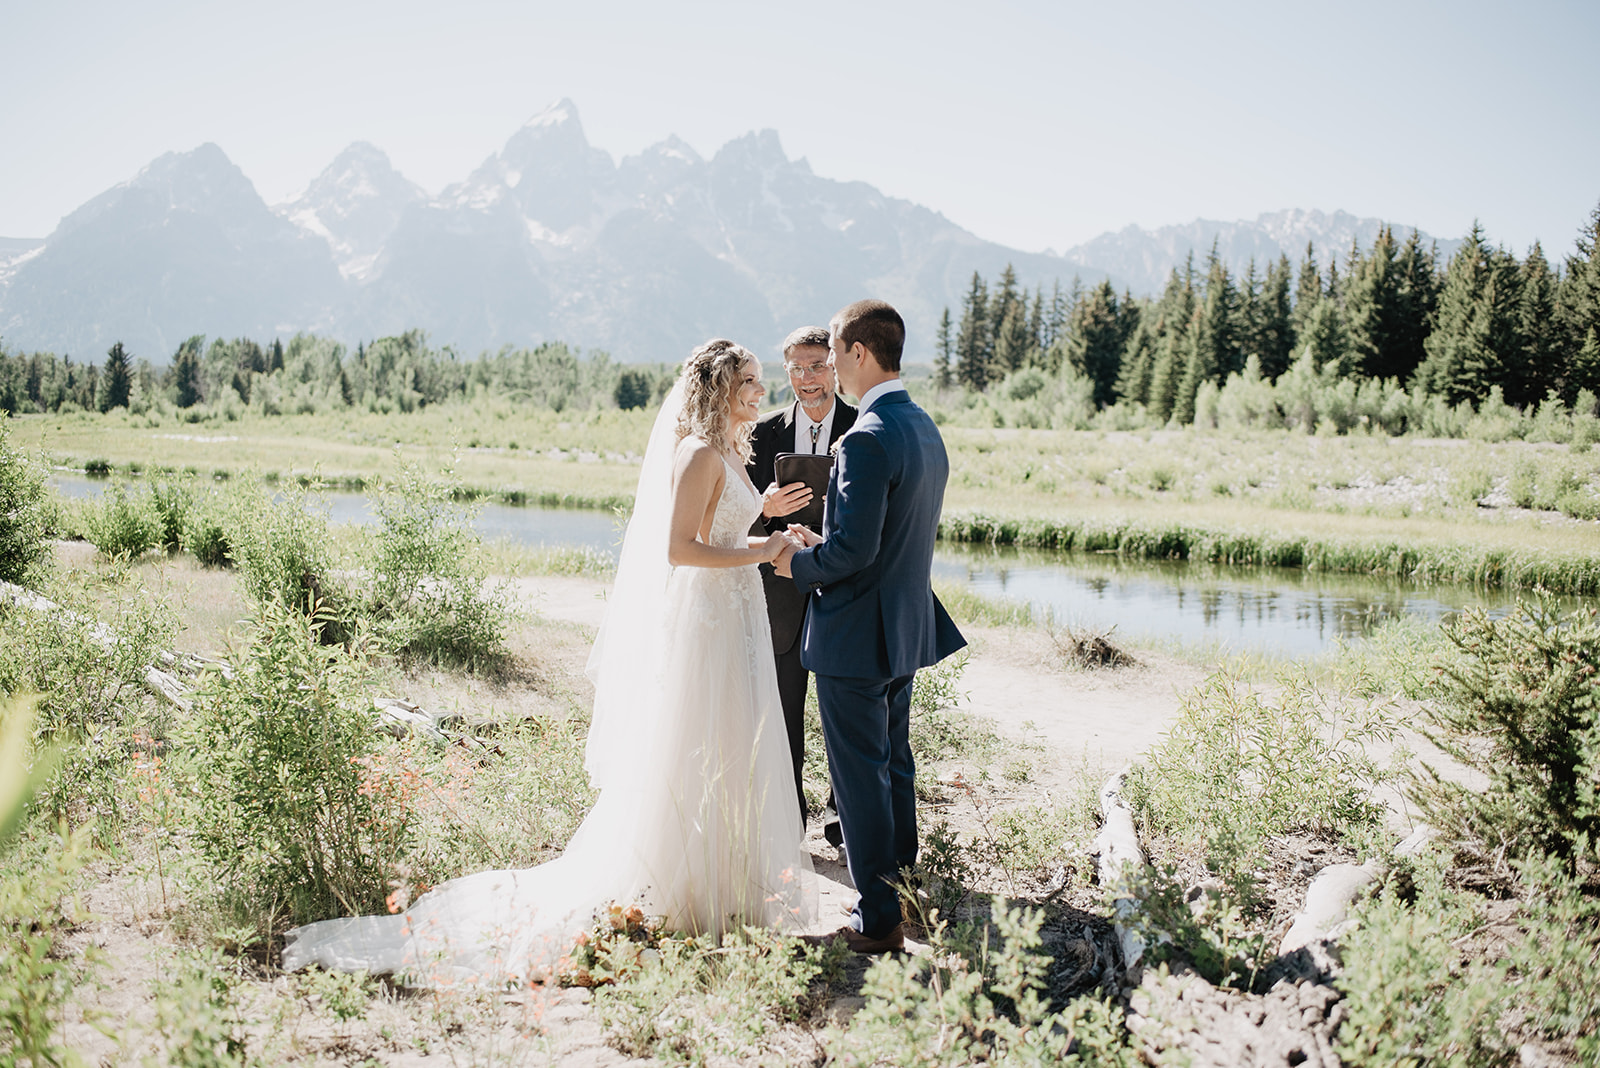 Grand Teton summer elopement wedding ceremony with bride and groom holding hands while their officiant marries them with the Tetons mountains behind them